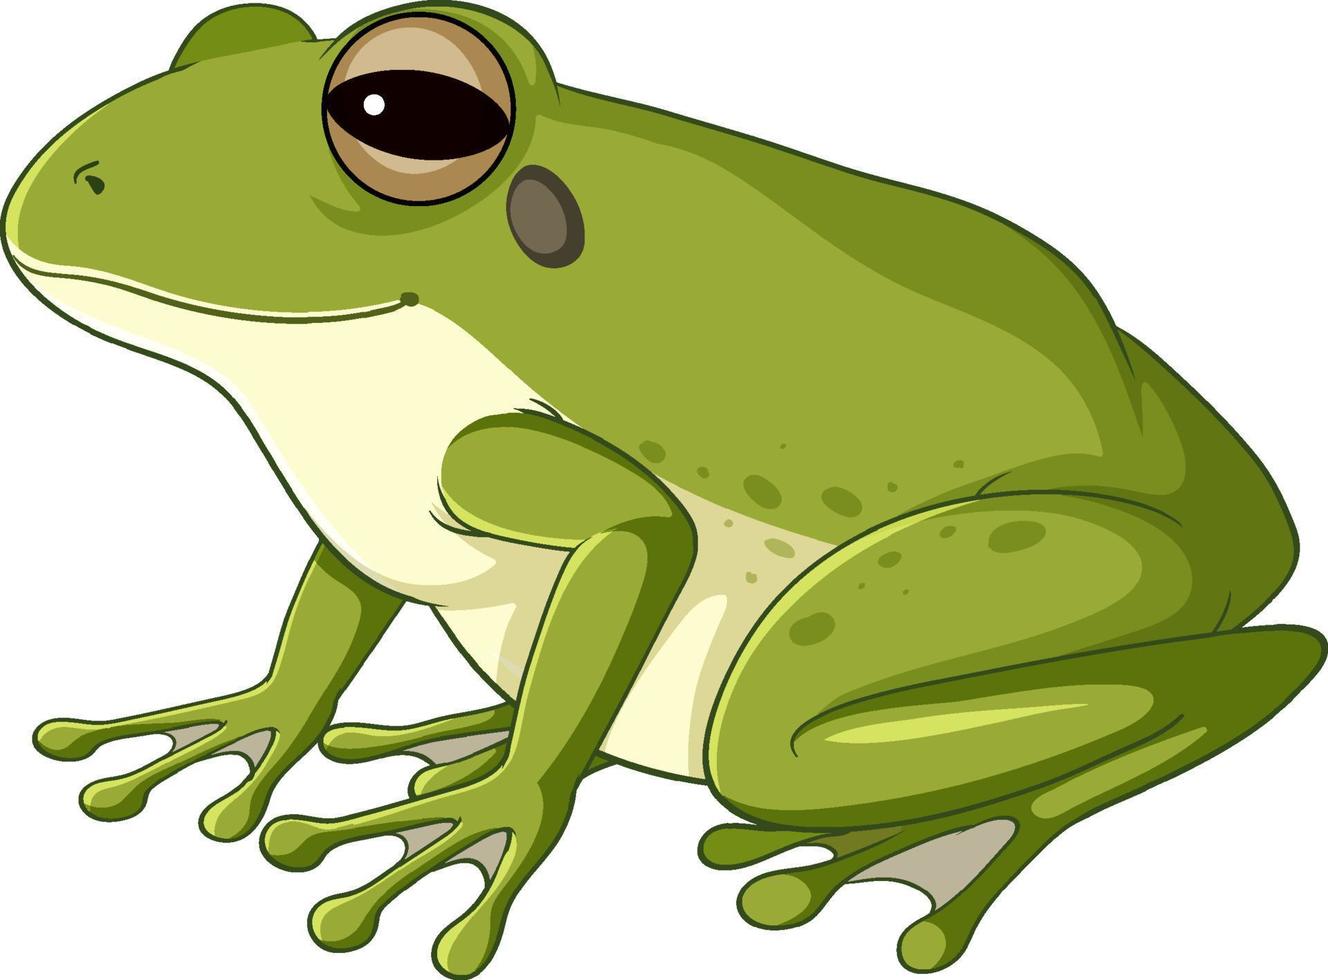 A green frog on white background vector